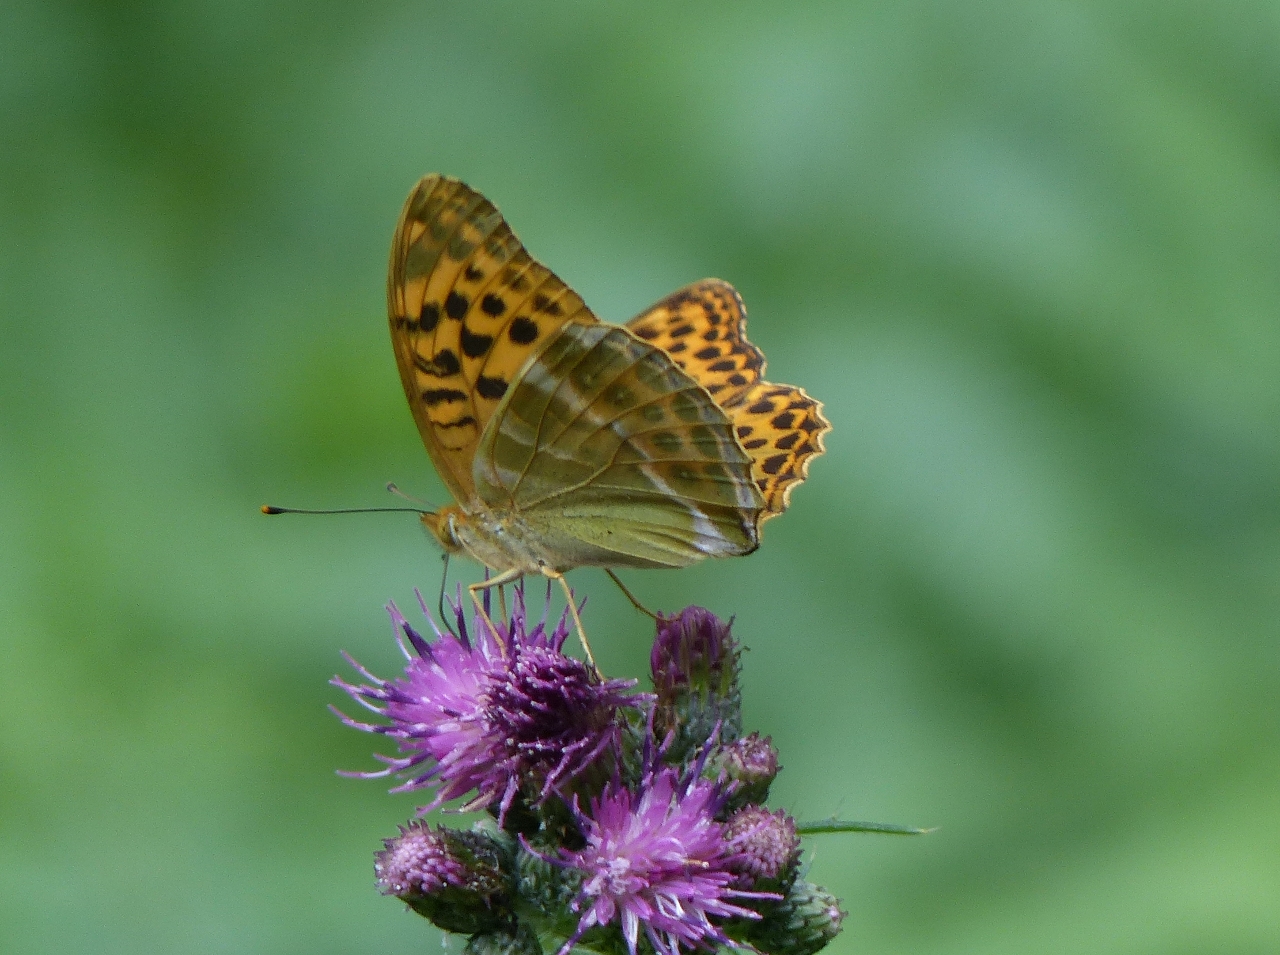 The silver-washed fritillary butterfly is our largest fritillary and gets its name from the beautiful streaks of silver found on the underside of the wings.